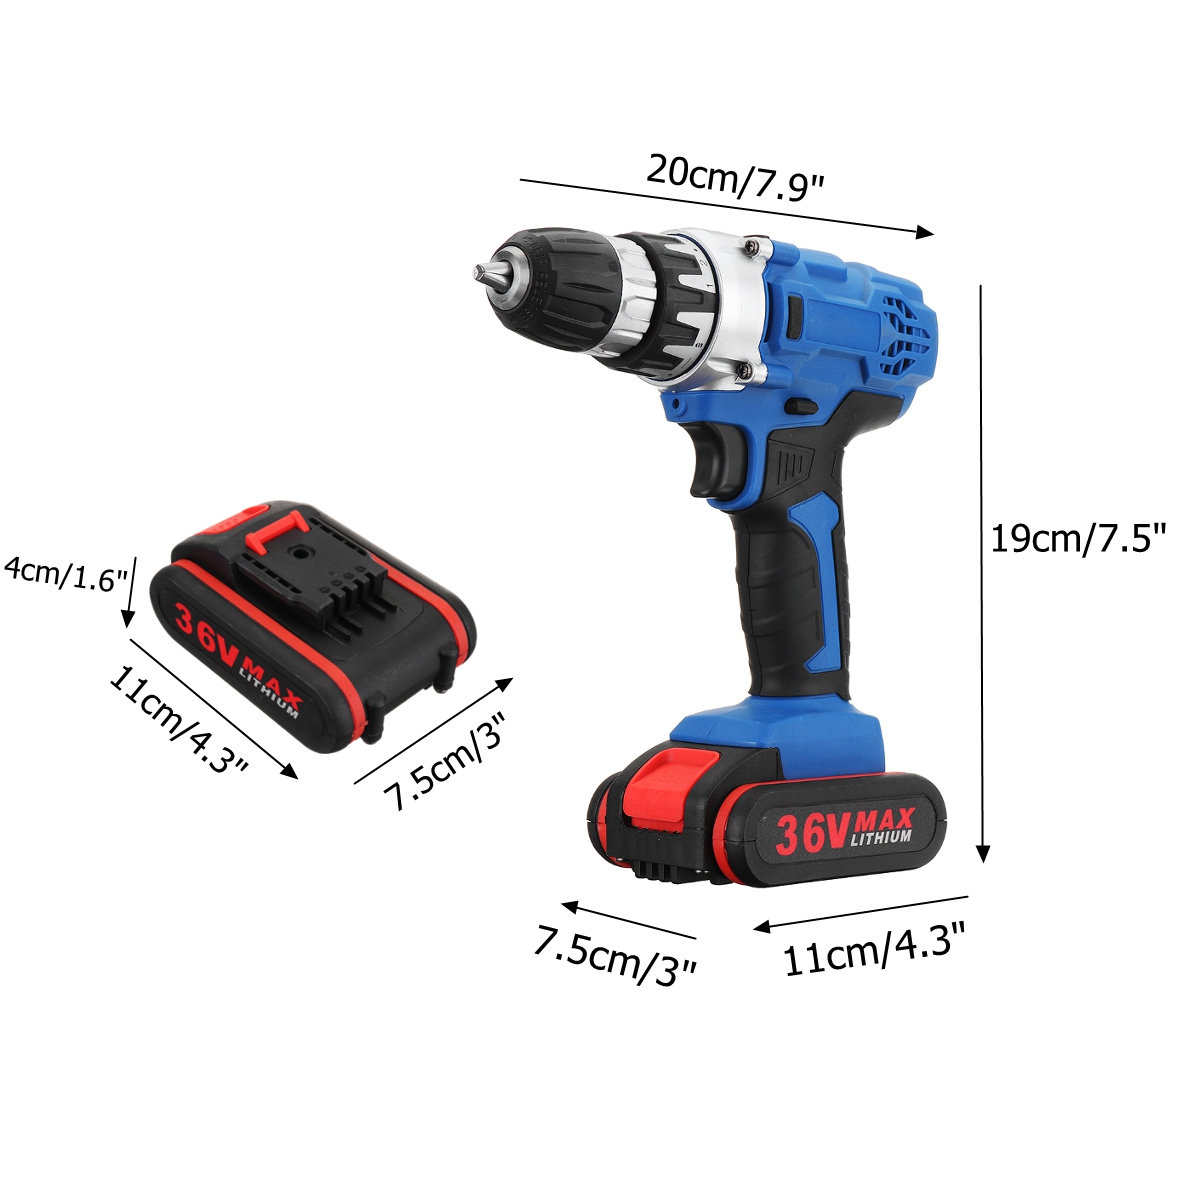 36V-Cordless-Power-Drill-Set-Double-Speed-Electric-Screwdriver-Drill-Power-Display-W-1-or-2-Li-Ion-B-1435859-10